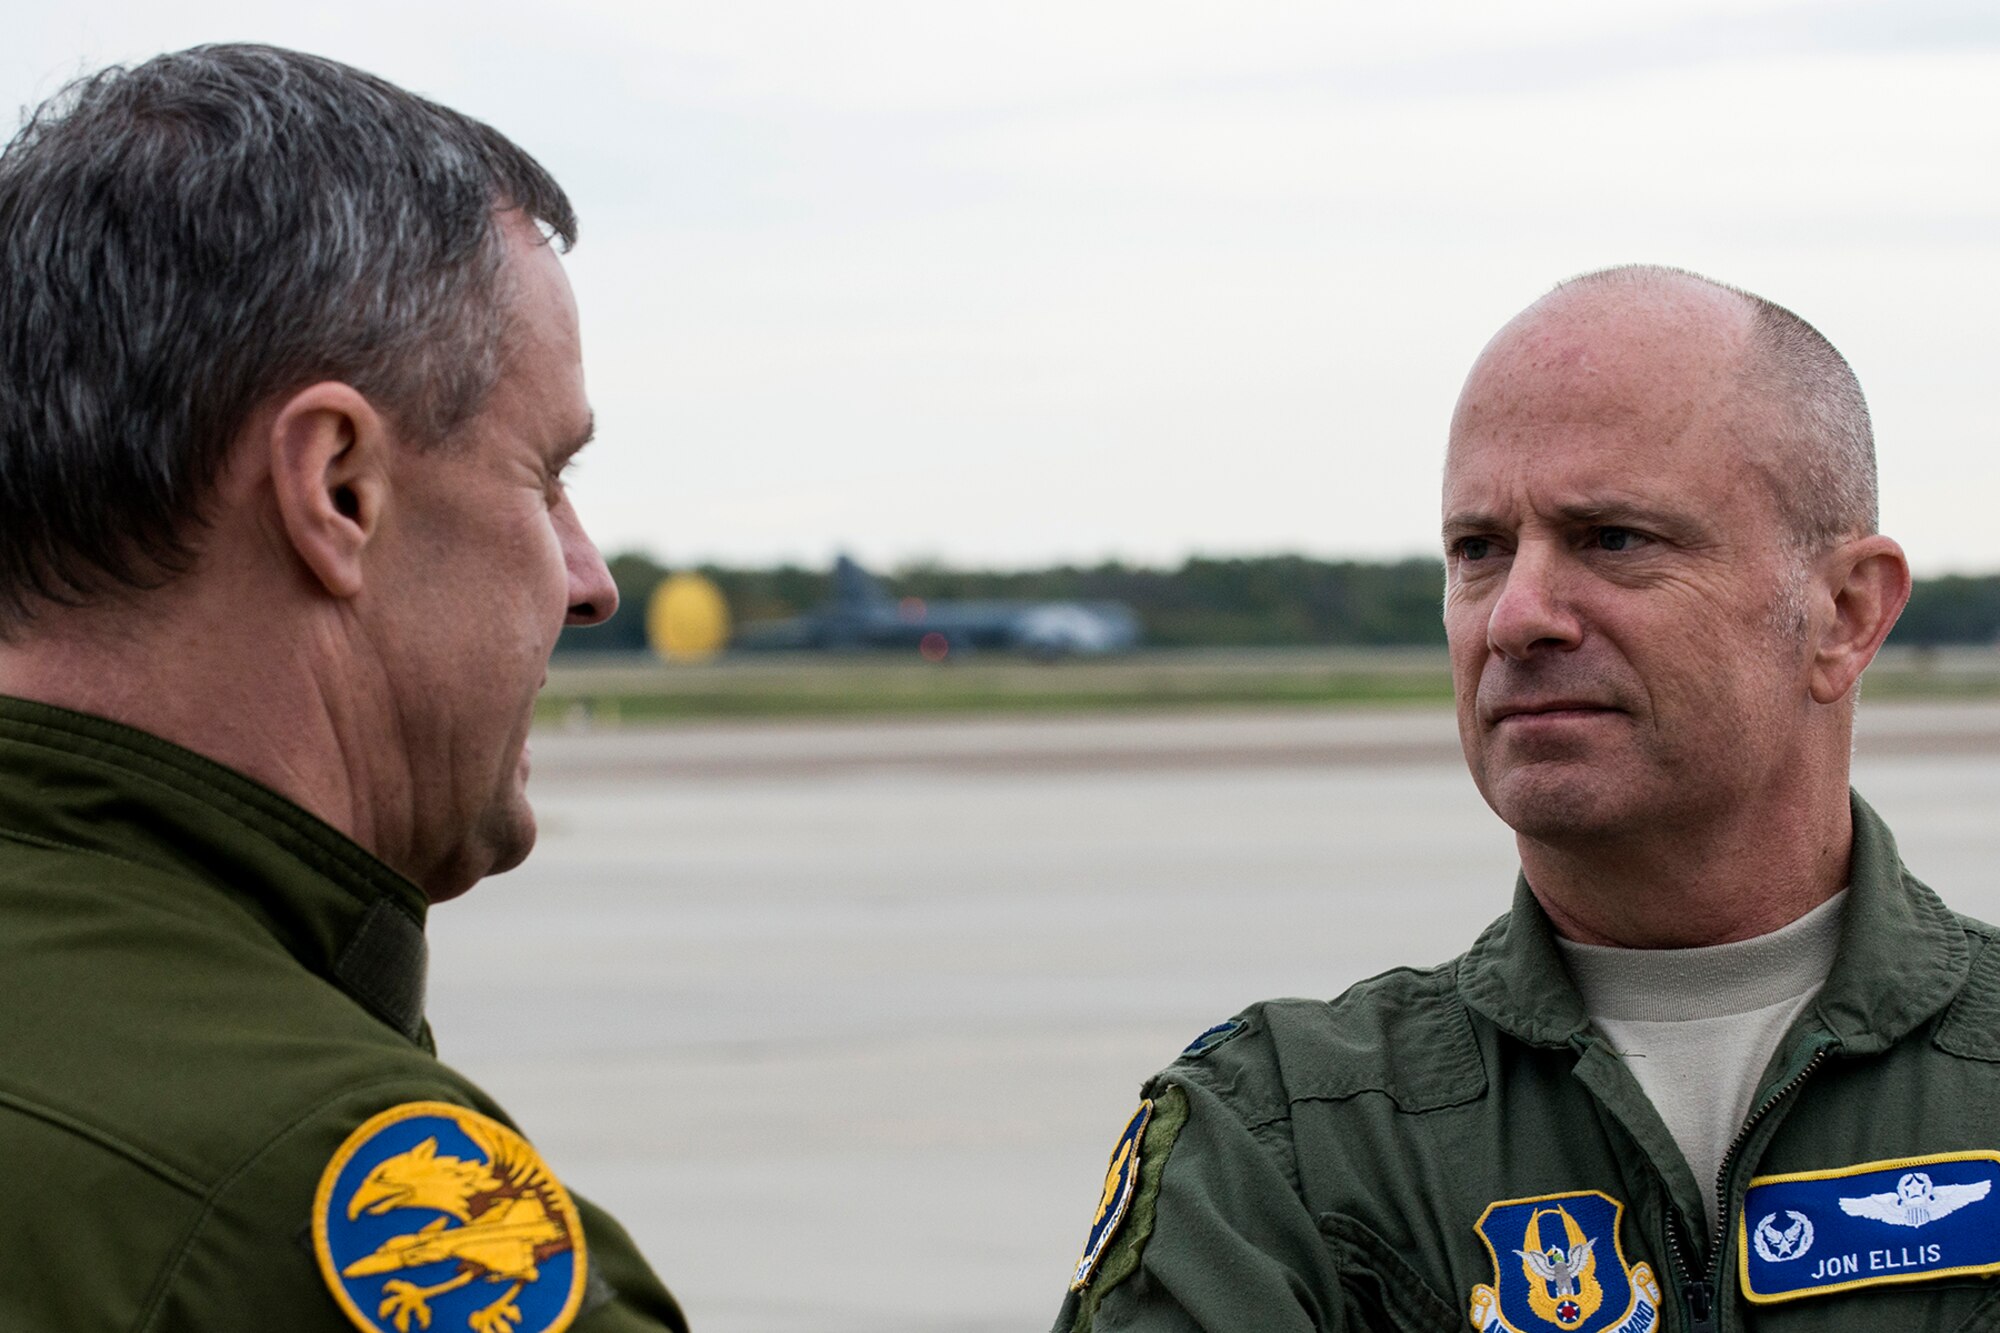 U.S. Air Force Col. Jonathan Ellis, 307th Bomb Wing commander, talks with Brig. Gen. Jiri Verner, Nov. 8, 2013, Barksdale Air Force Base, La. Verner, the Defense Attaché of the Czech Republic in the United States, accompanied the Jagello 2000, which is based in Ostrava, Czech Republic. (U.S. Air Force photo by Master Sgt. Greg Steele/Released)